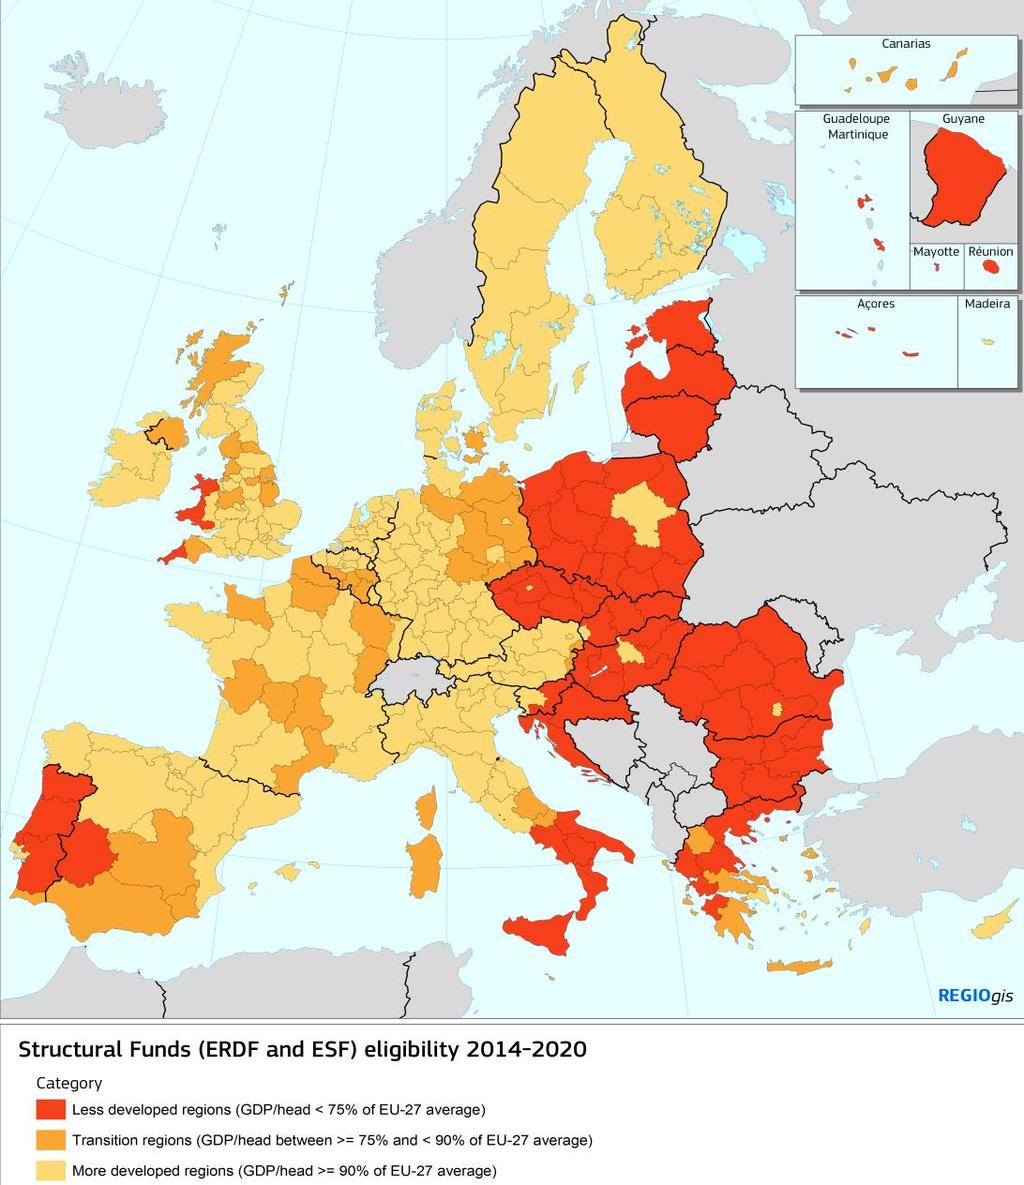 Cohesion Policy + ESIF basics Based on EU Treaty and aiming at 'economic, social and territorial cohesion' and 'reducing disparities' 5 funds for Cohesion Policy: European Regional Development Fund